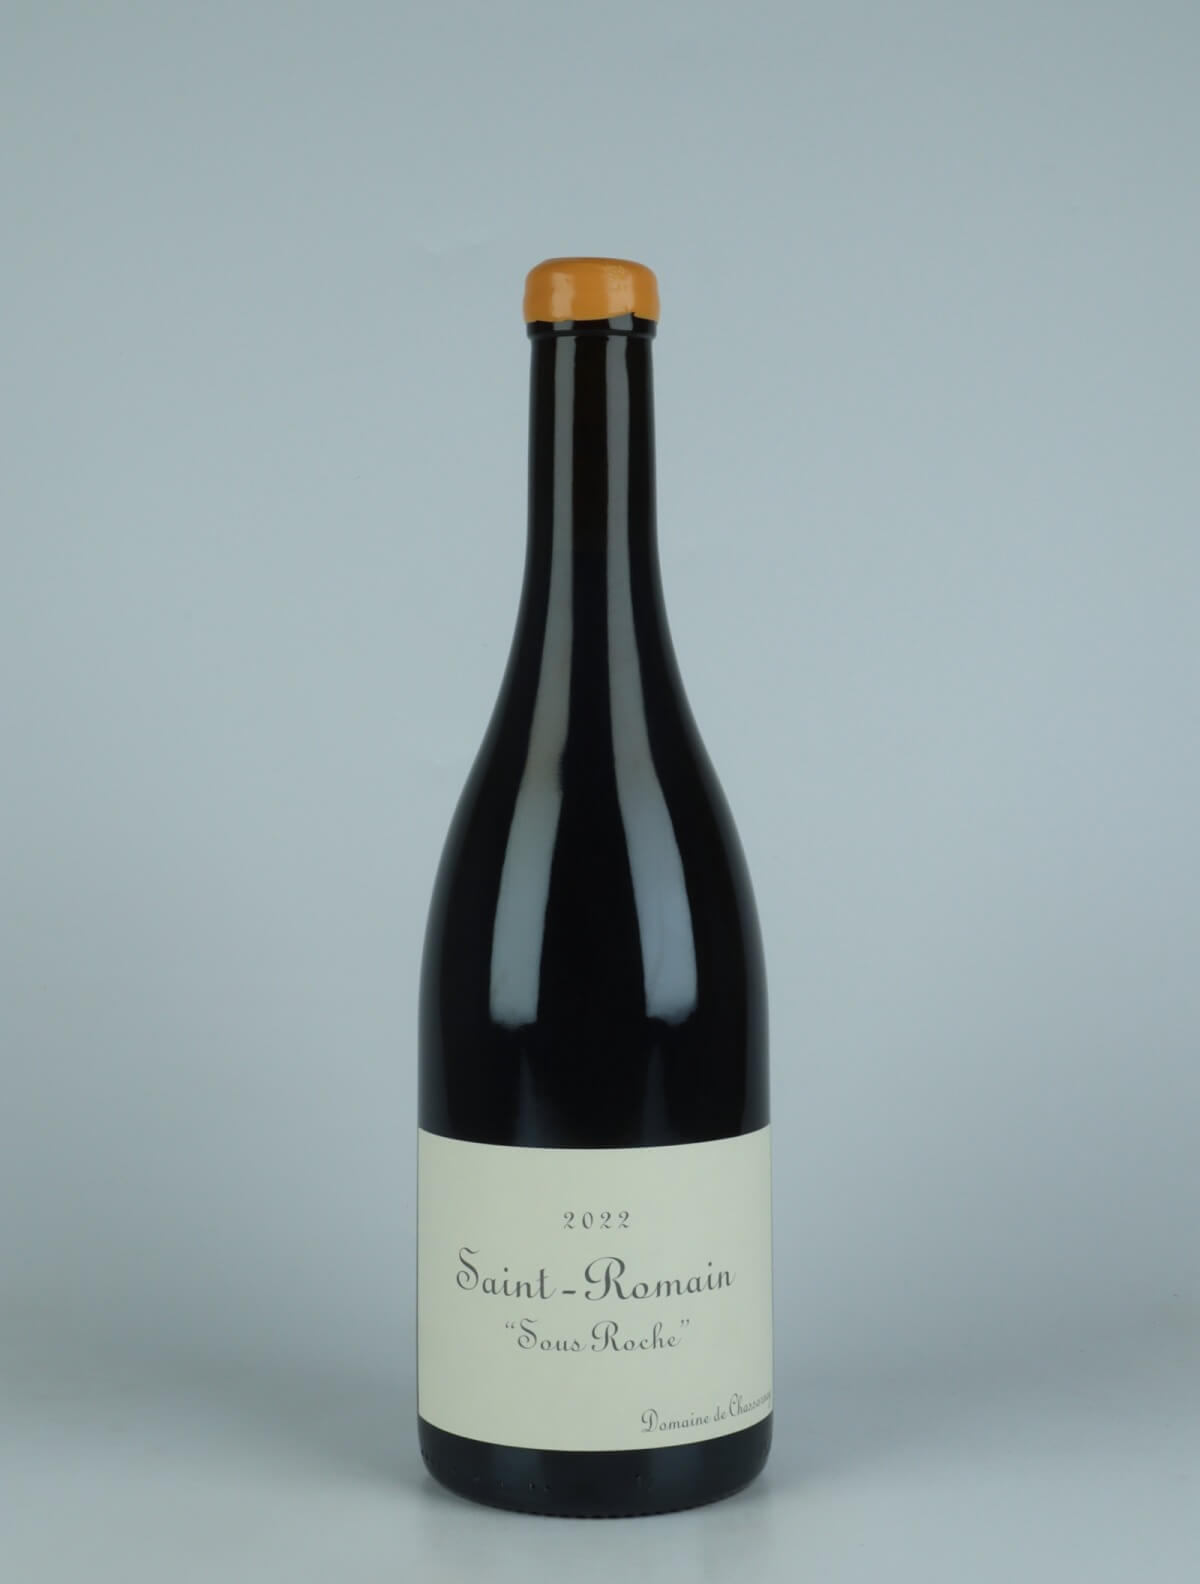 A bottle 2022 Saint Romain Rouge - Sous Roche Red wine from Domaine de Chassorney, Burgundy in France